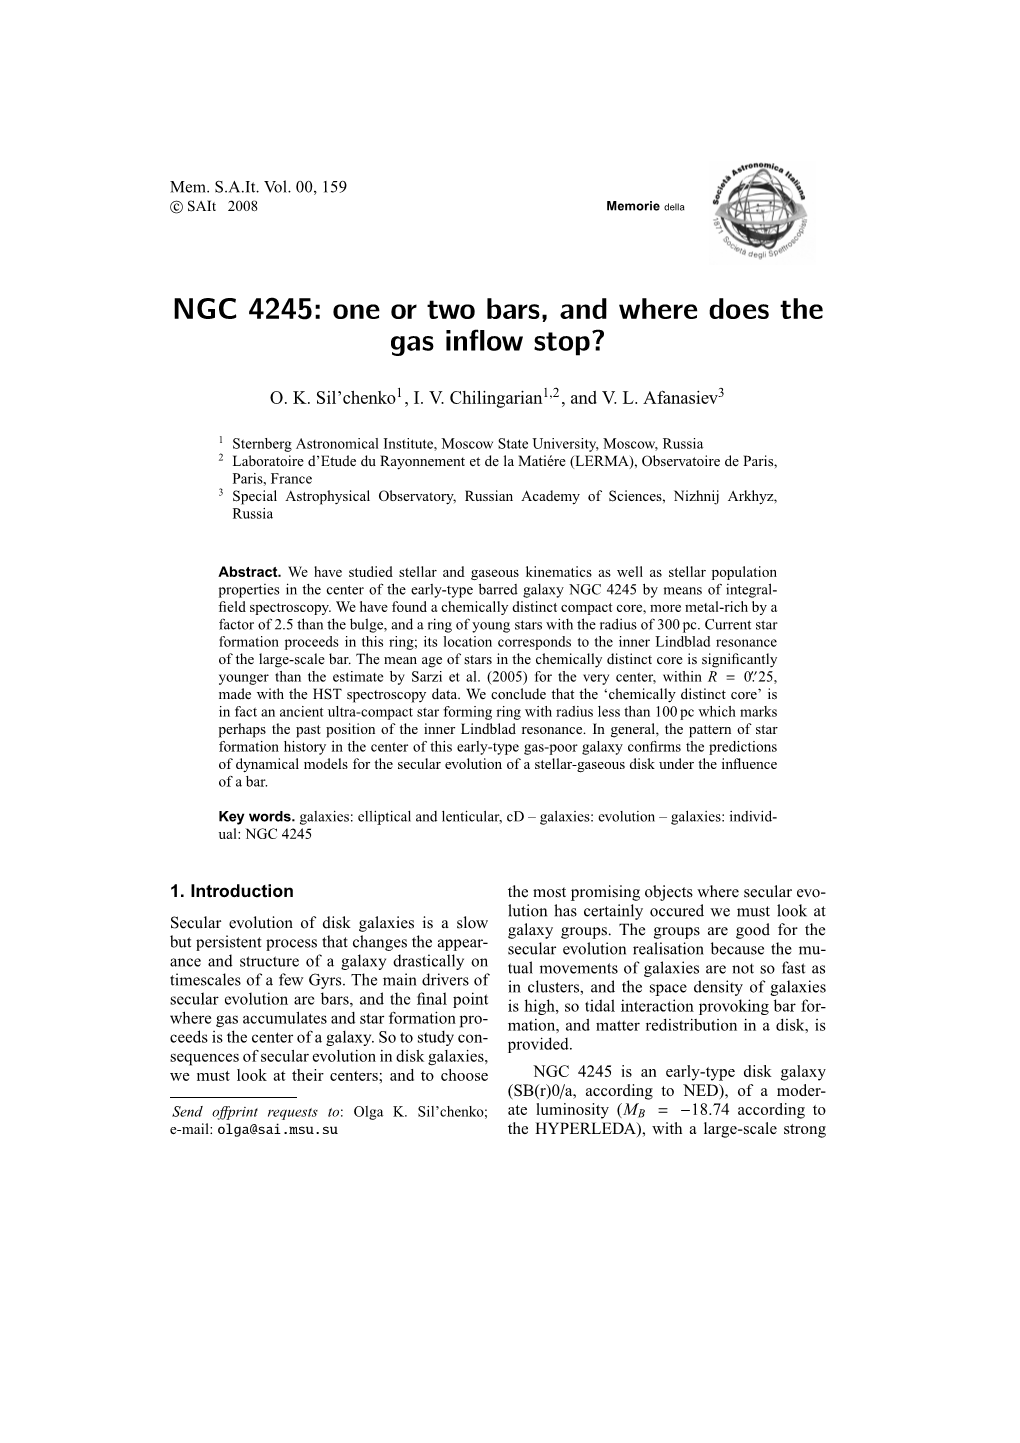 NGC 4245: One Or Two Bars, and Where Does the Gas Inflow Stop?